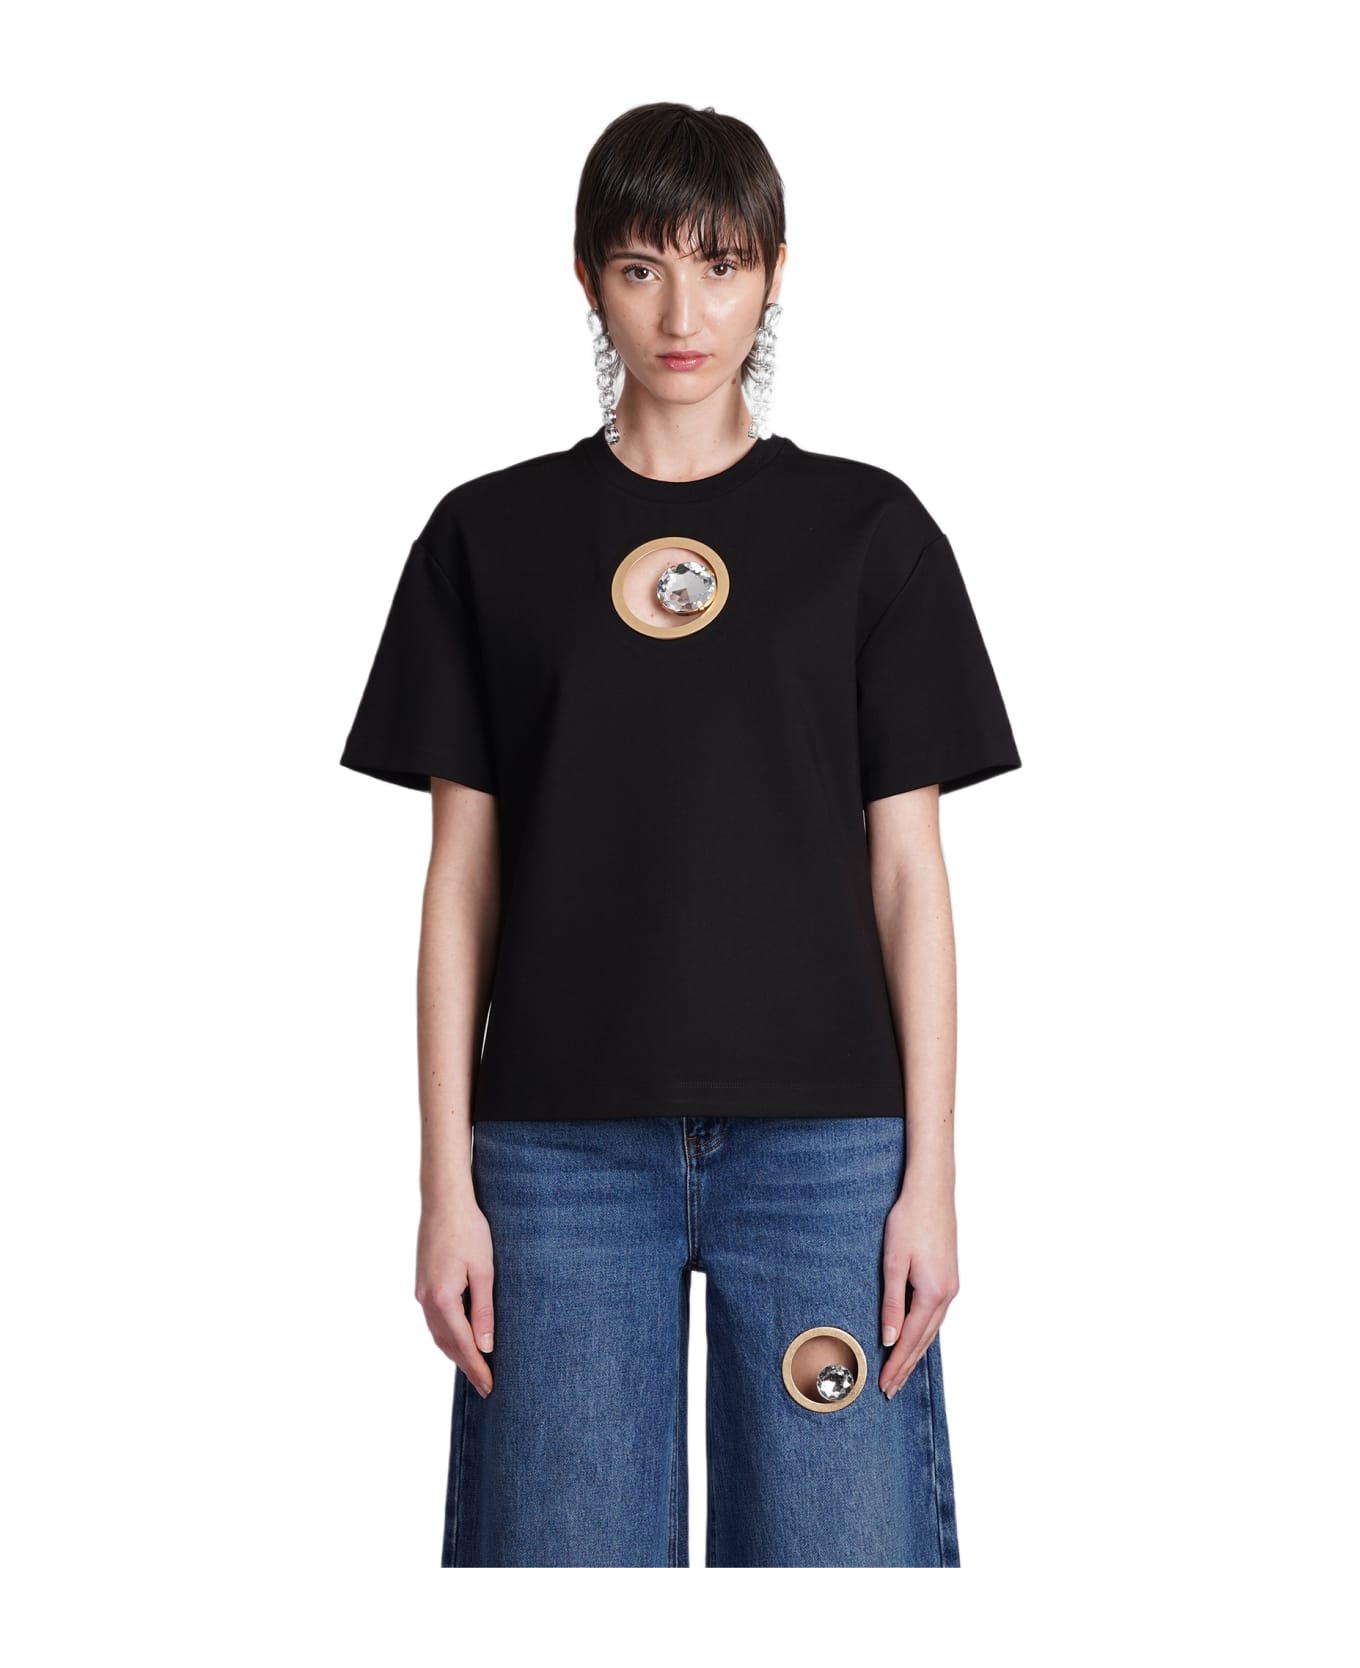 AREA T-shirt In Black Rayon - black